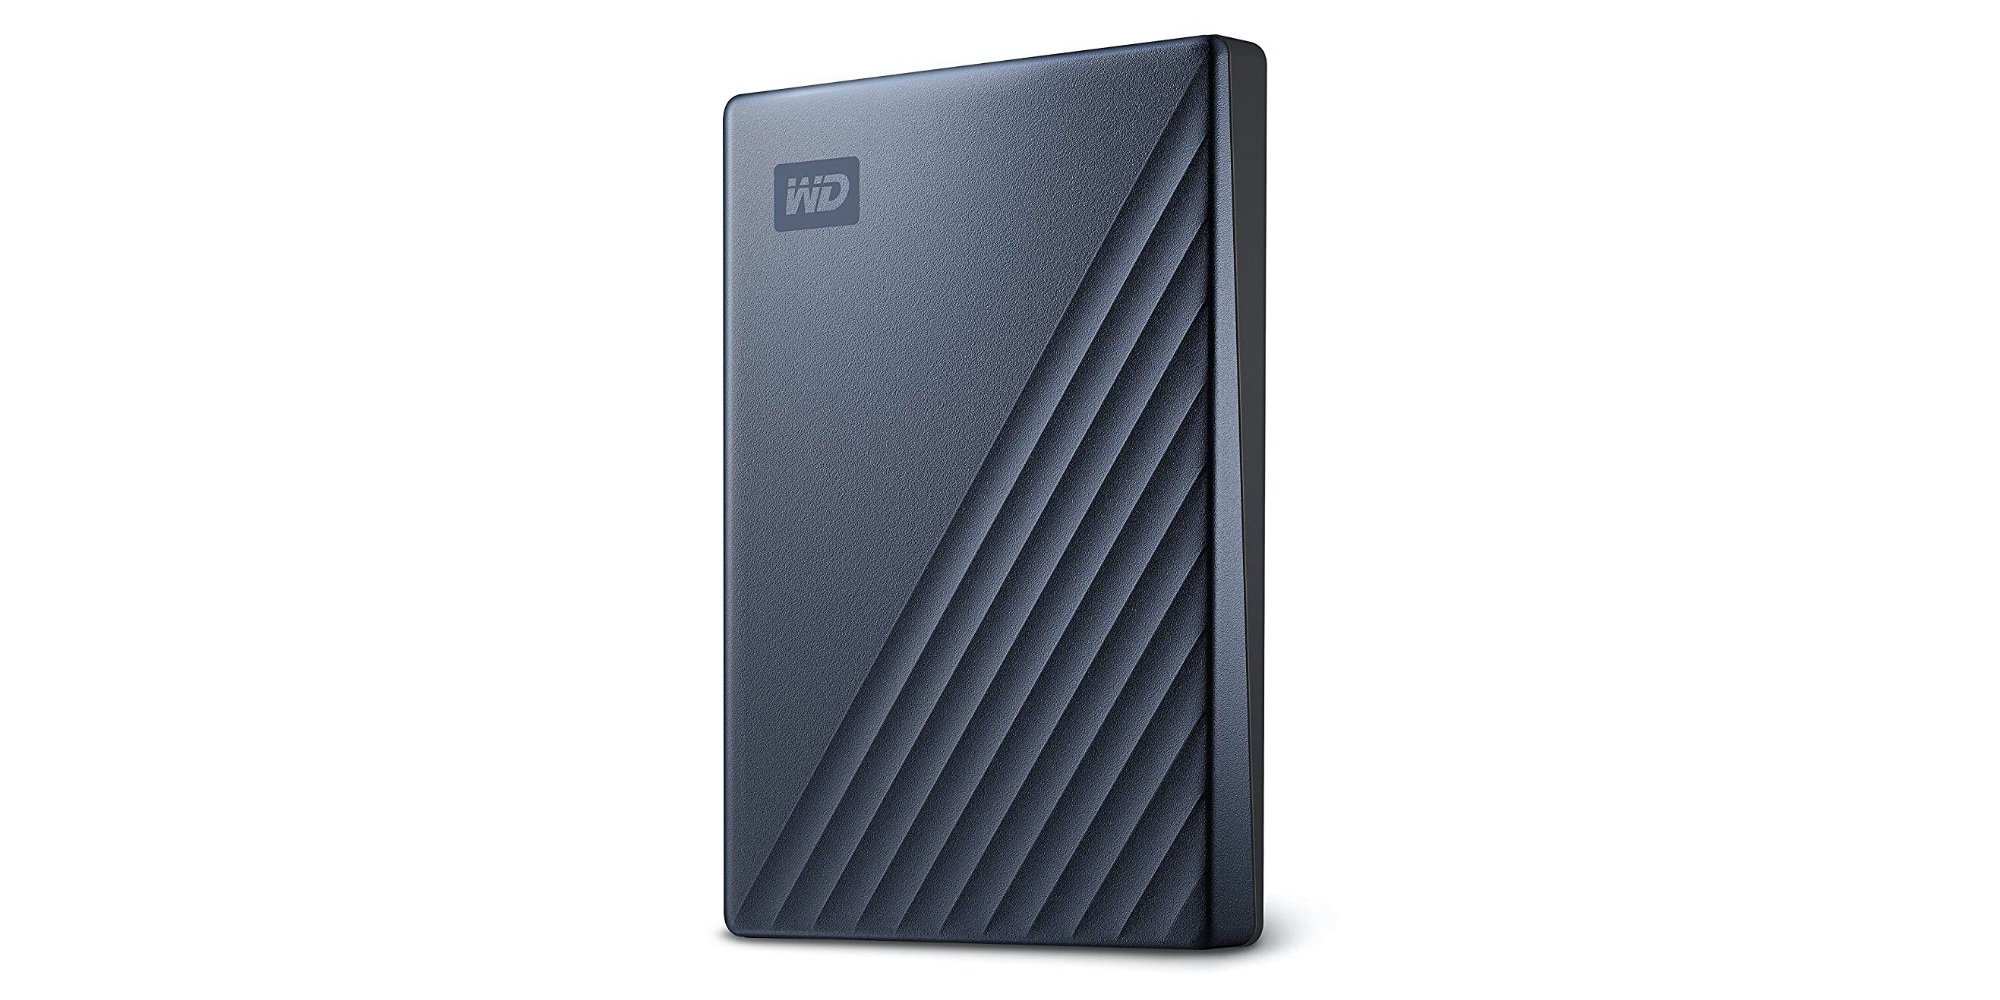 wd my passport for mac icon